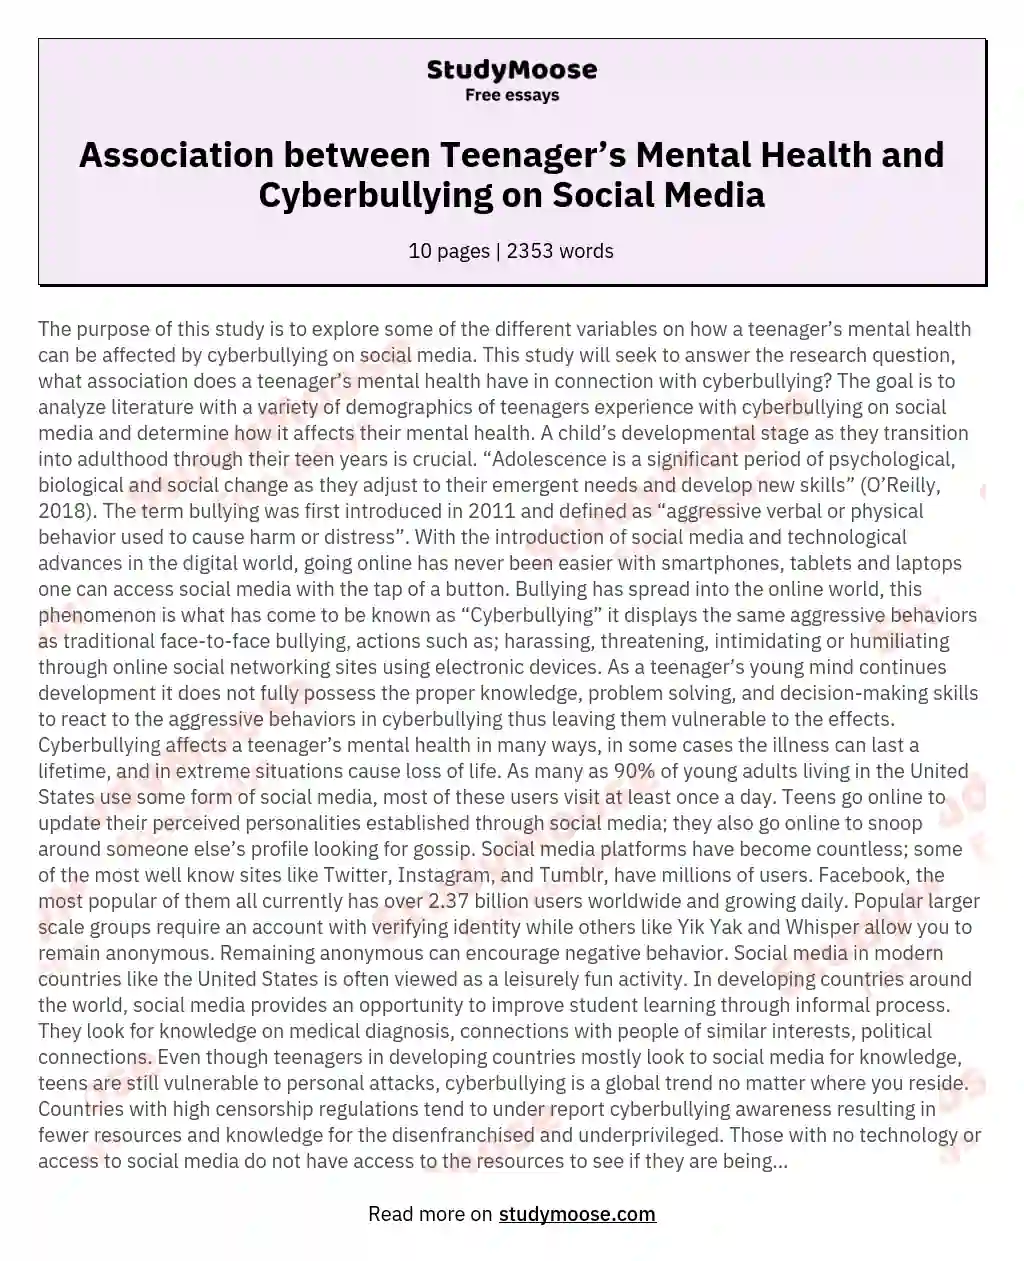 Association between Teenager’s Mental Health and Cyberbullying on Social Media essay